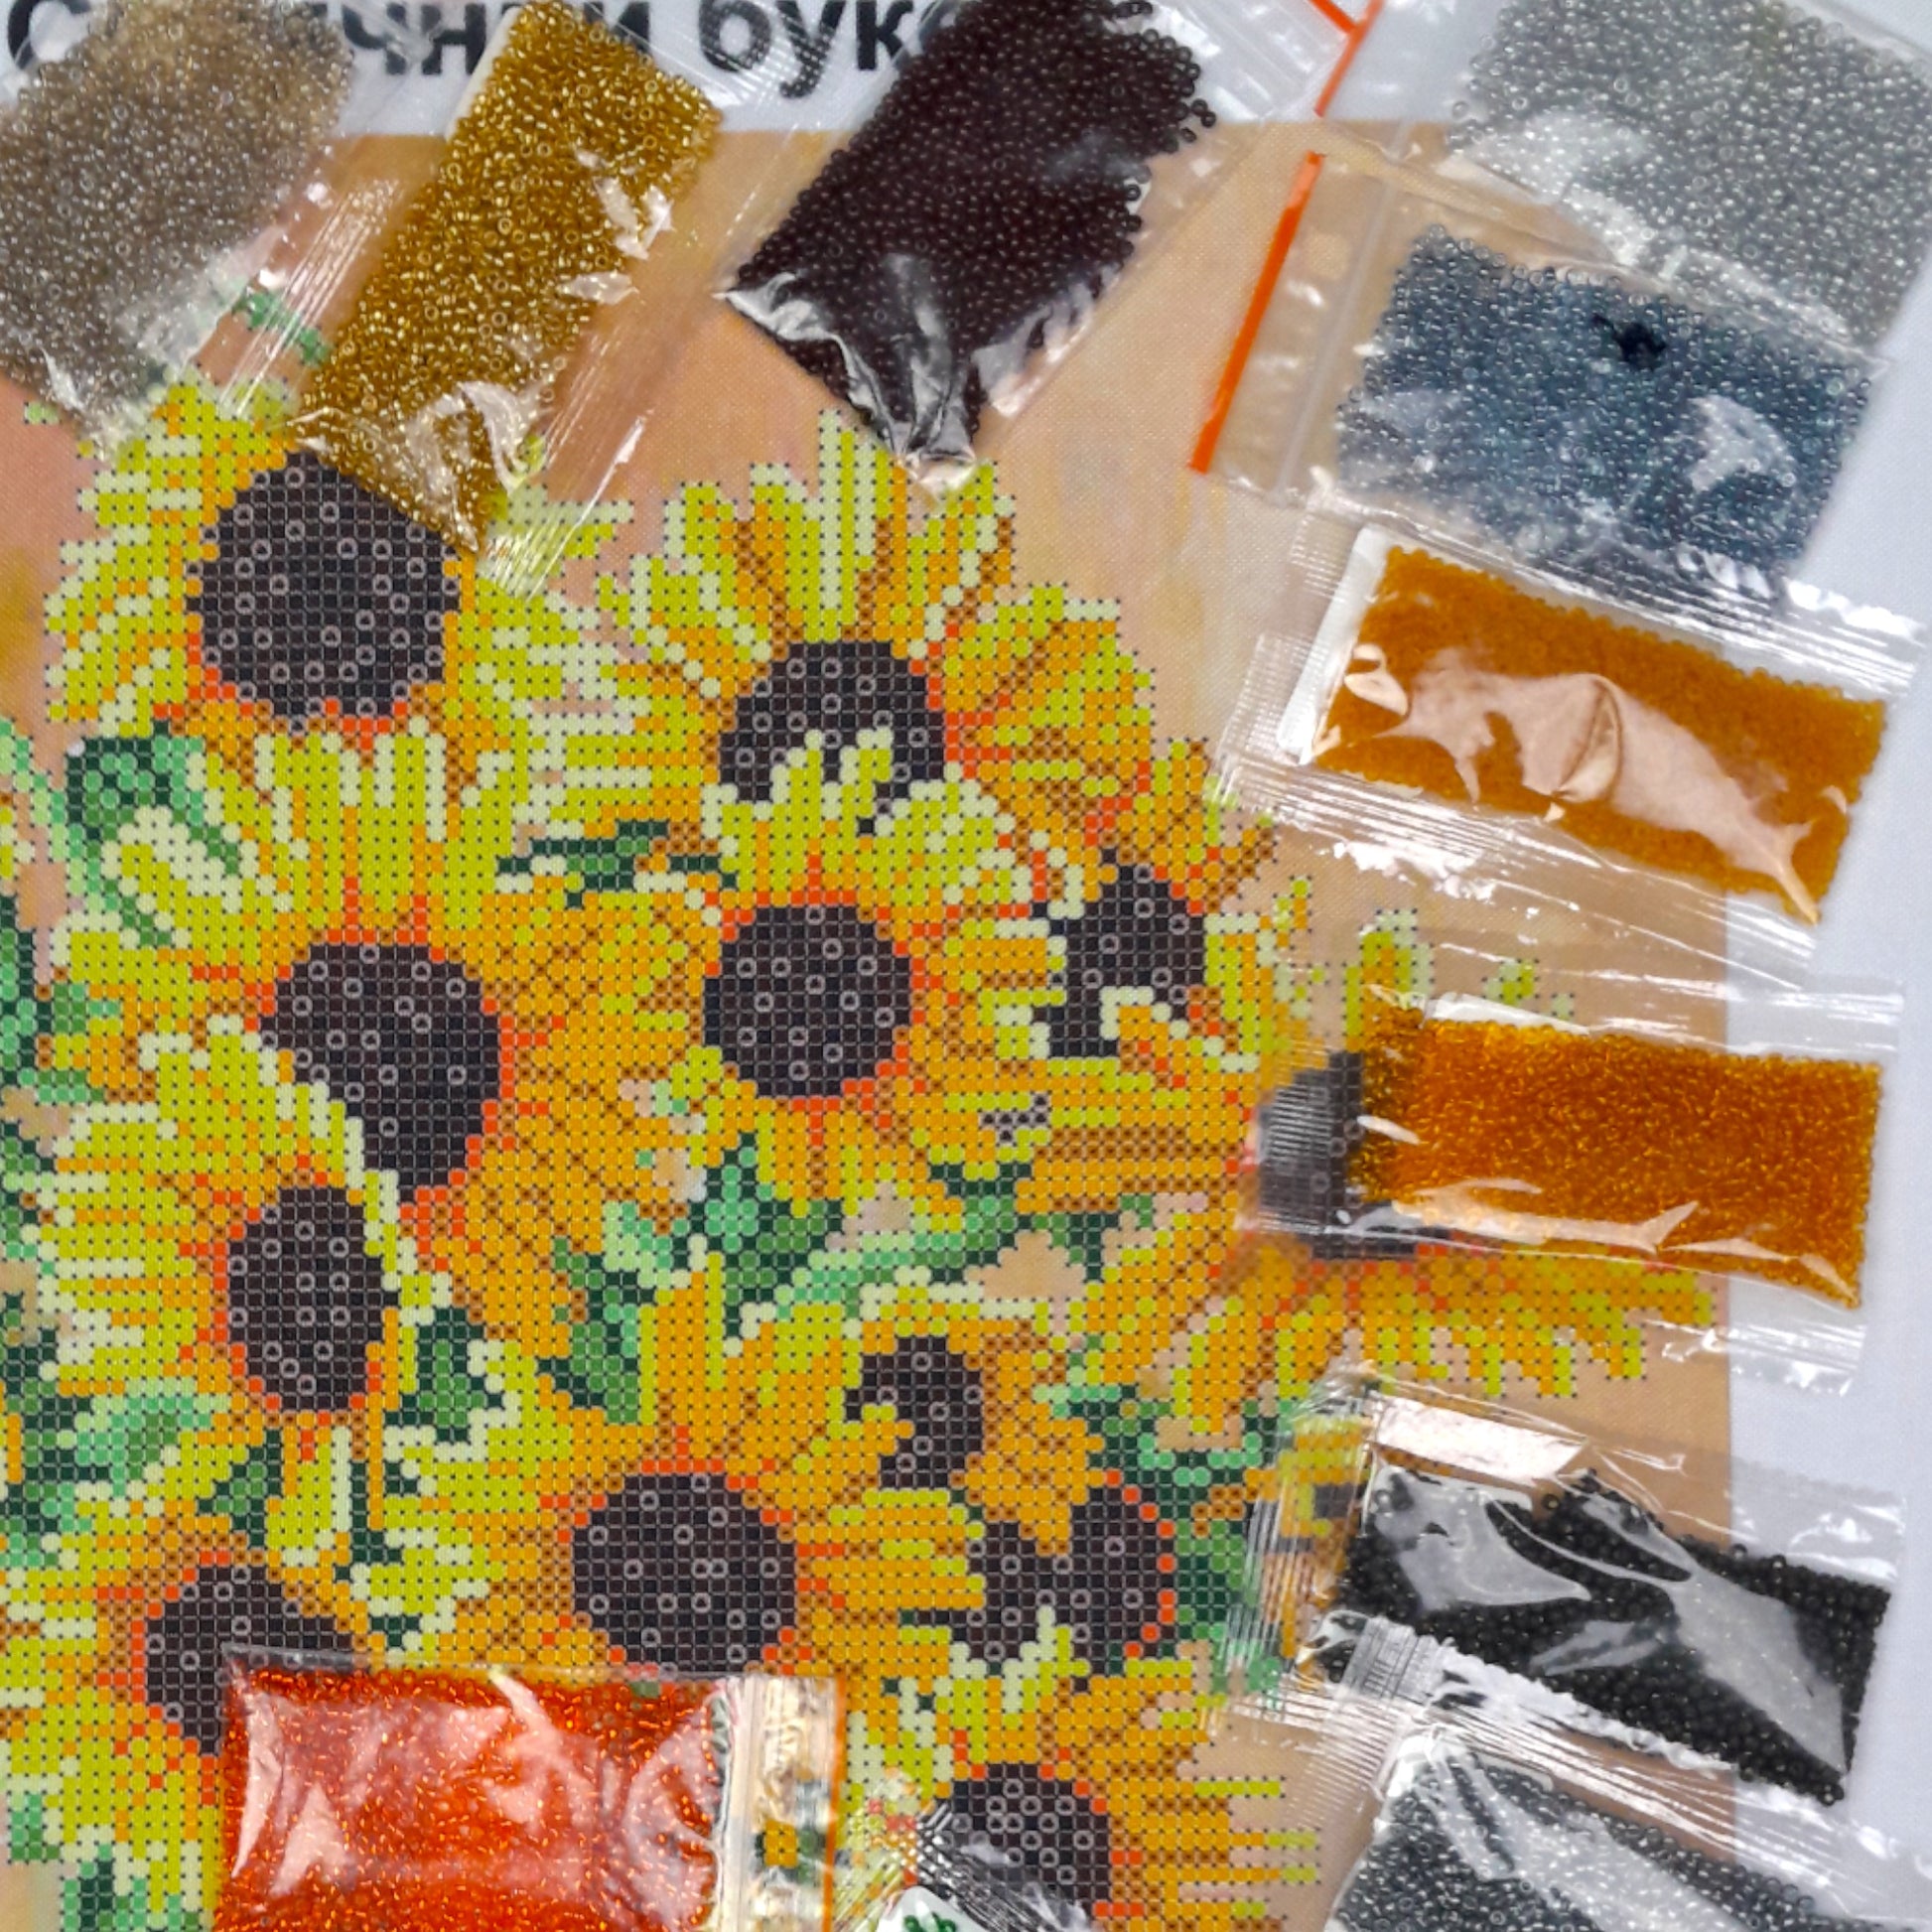 DIY Bead embroidery kit "Sunflowers". Size: 11.4-14.6in (23-37сm) - VadymShop